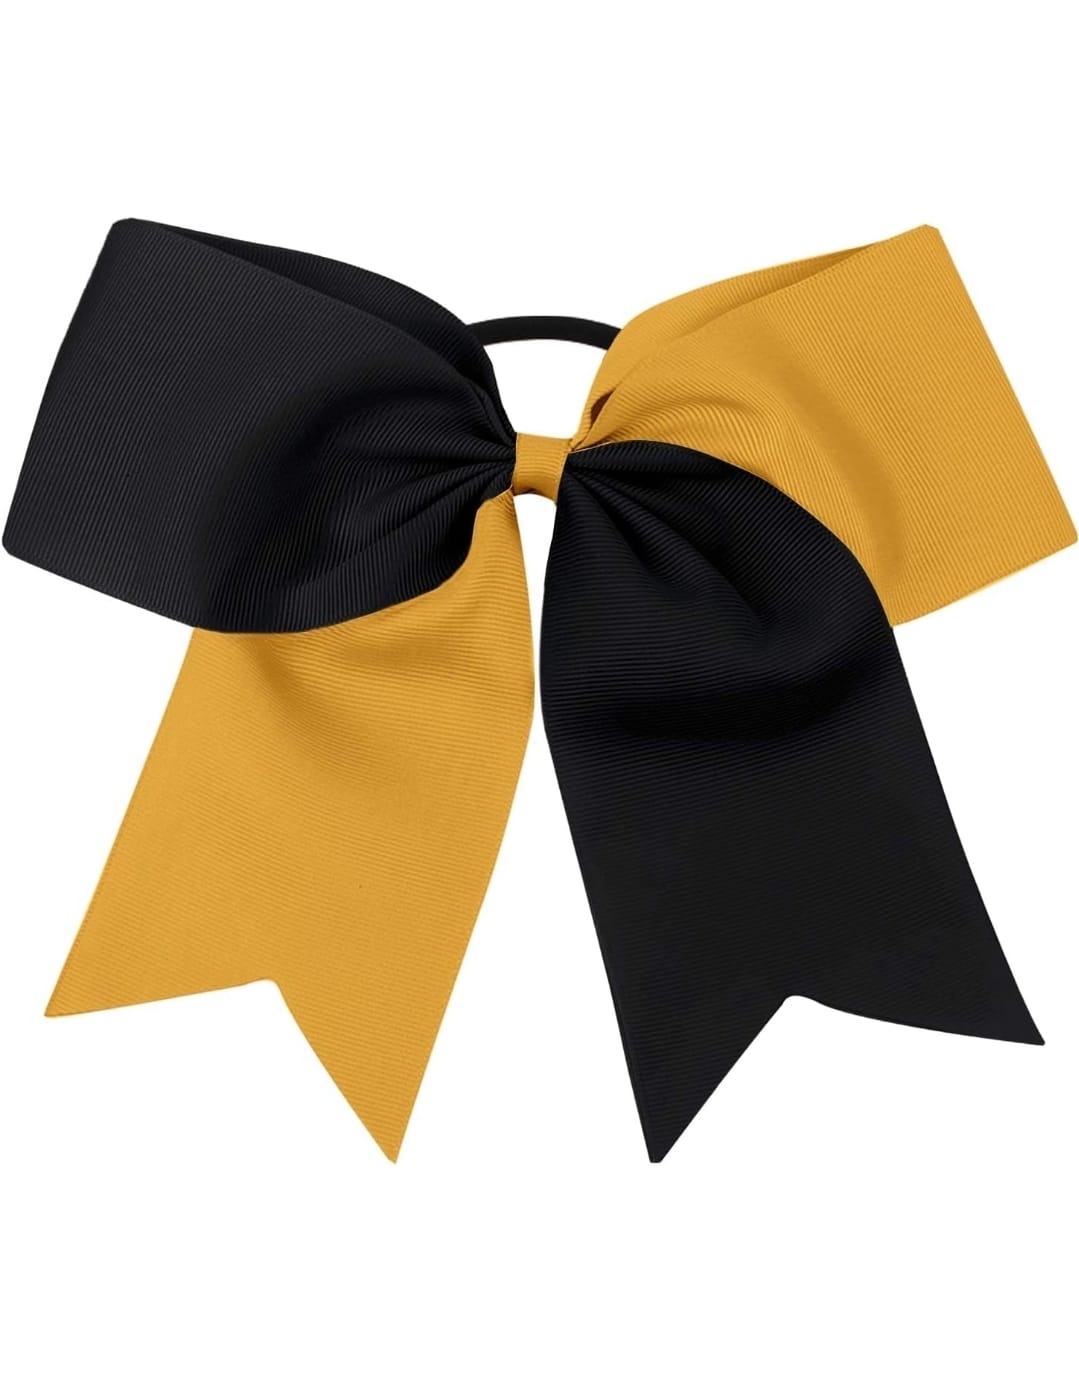 Gold and Black Cheer Bow